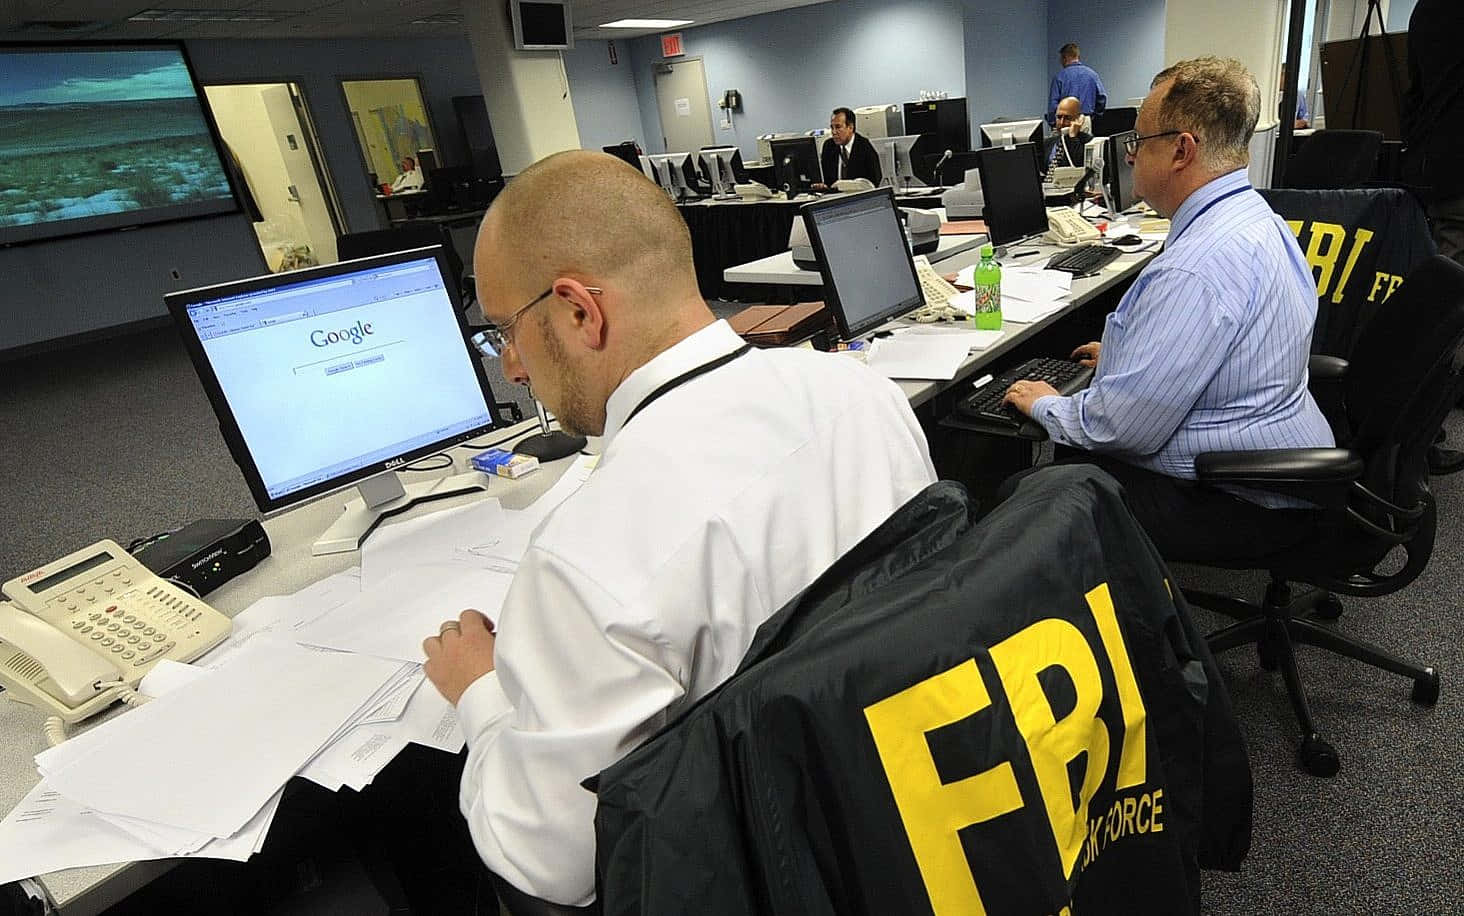 Fbi Agents Working In An Office With Computers